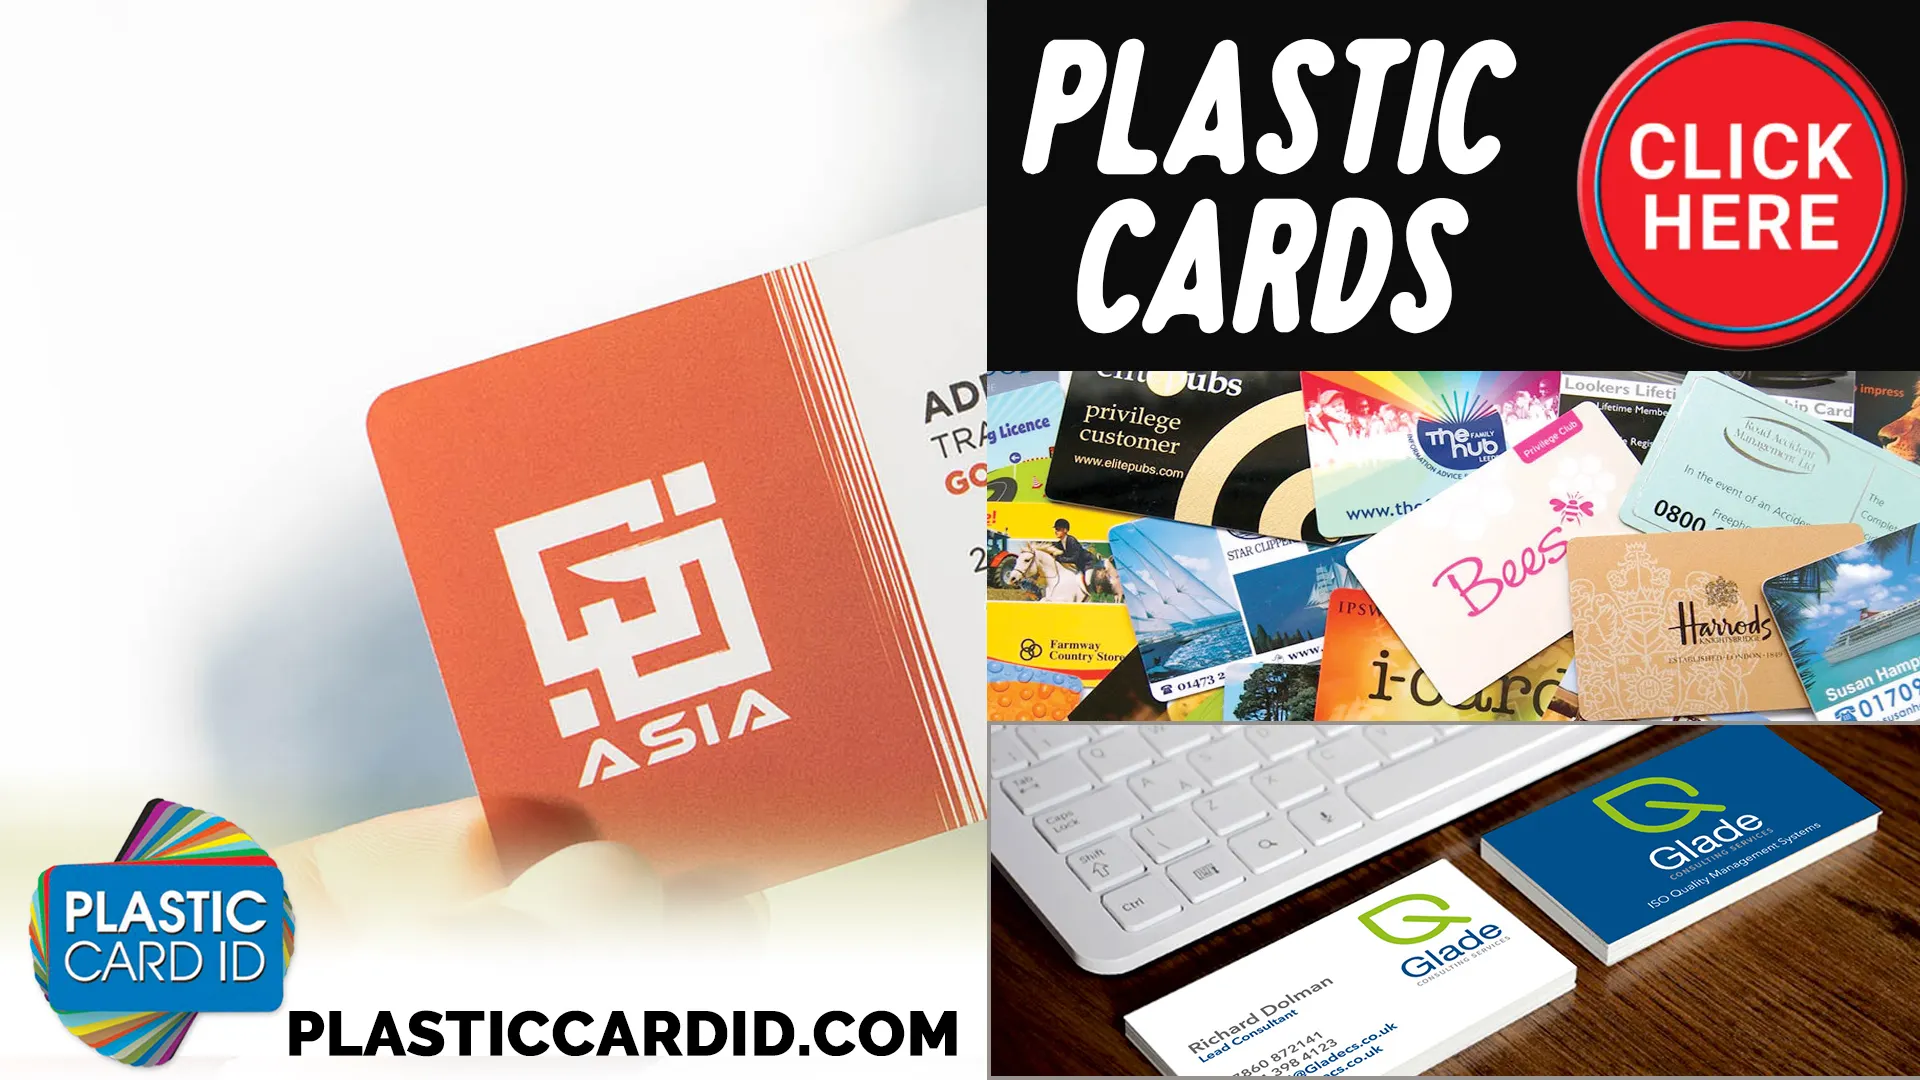 Welcome to Plastic Card ID




: Your Trusted Partner for Local Printing Services